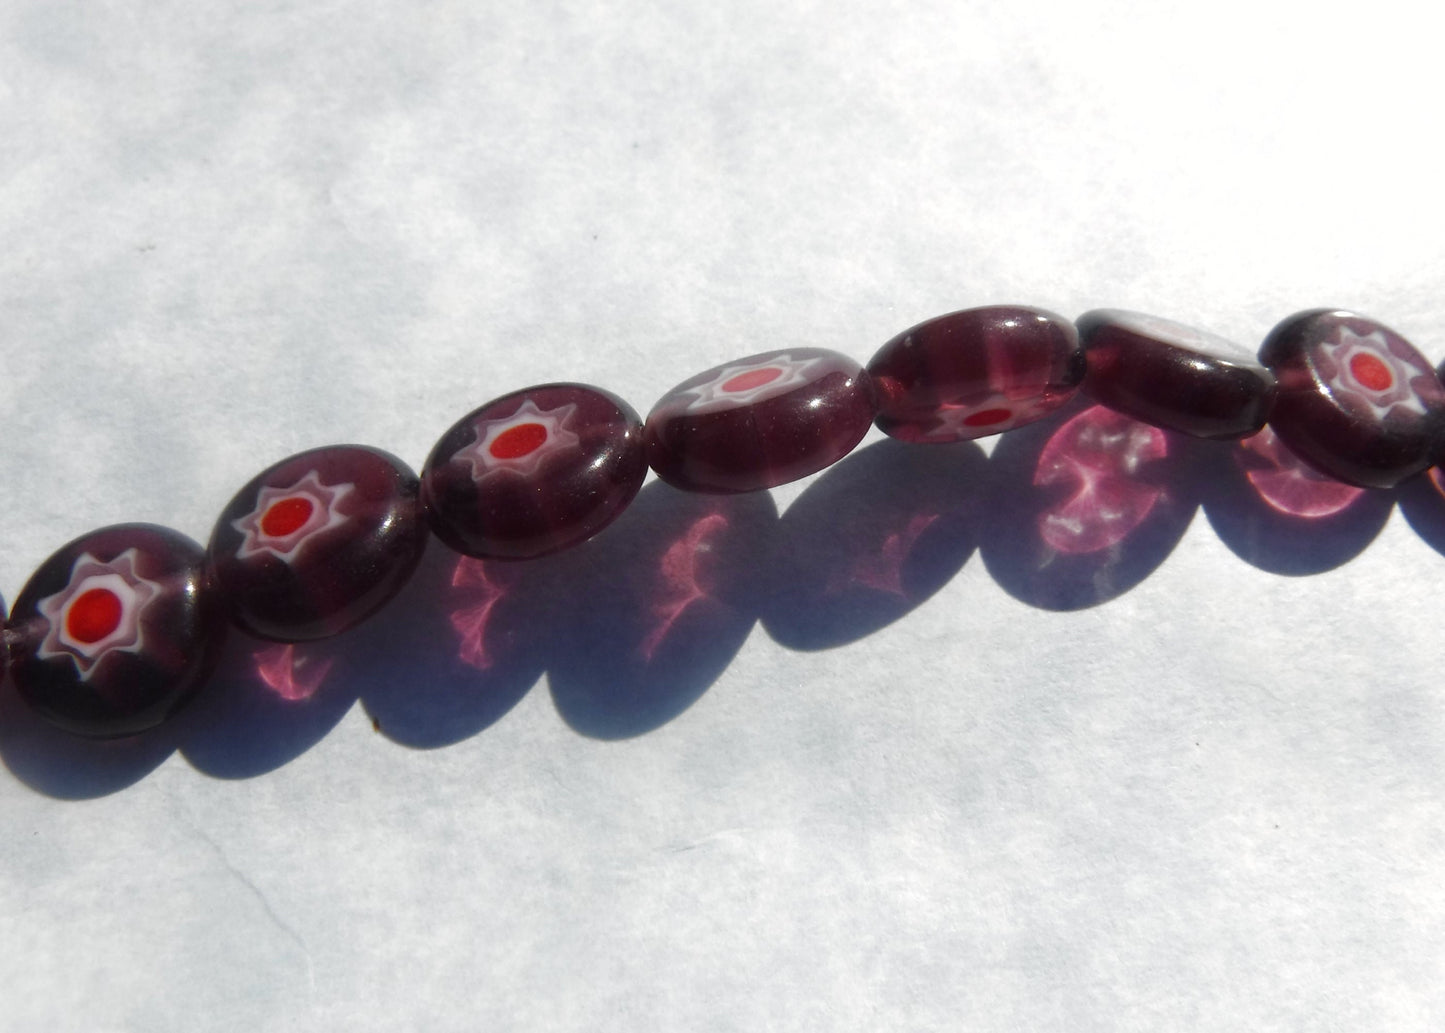 Purple and Red Millefiori Glass Beads - 10mm - Use in Mosaics and Jewelry Making - White Flowers